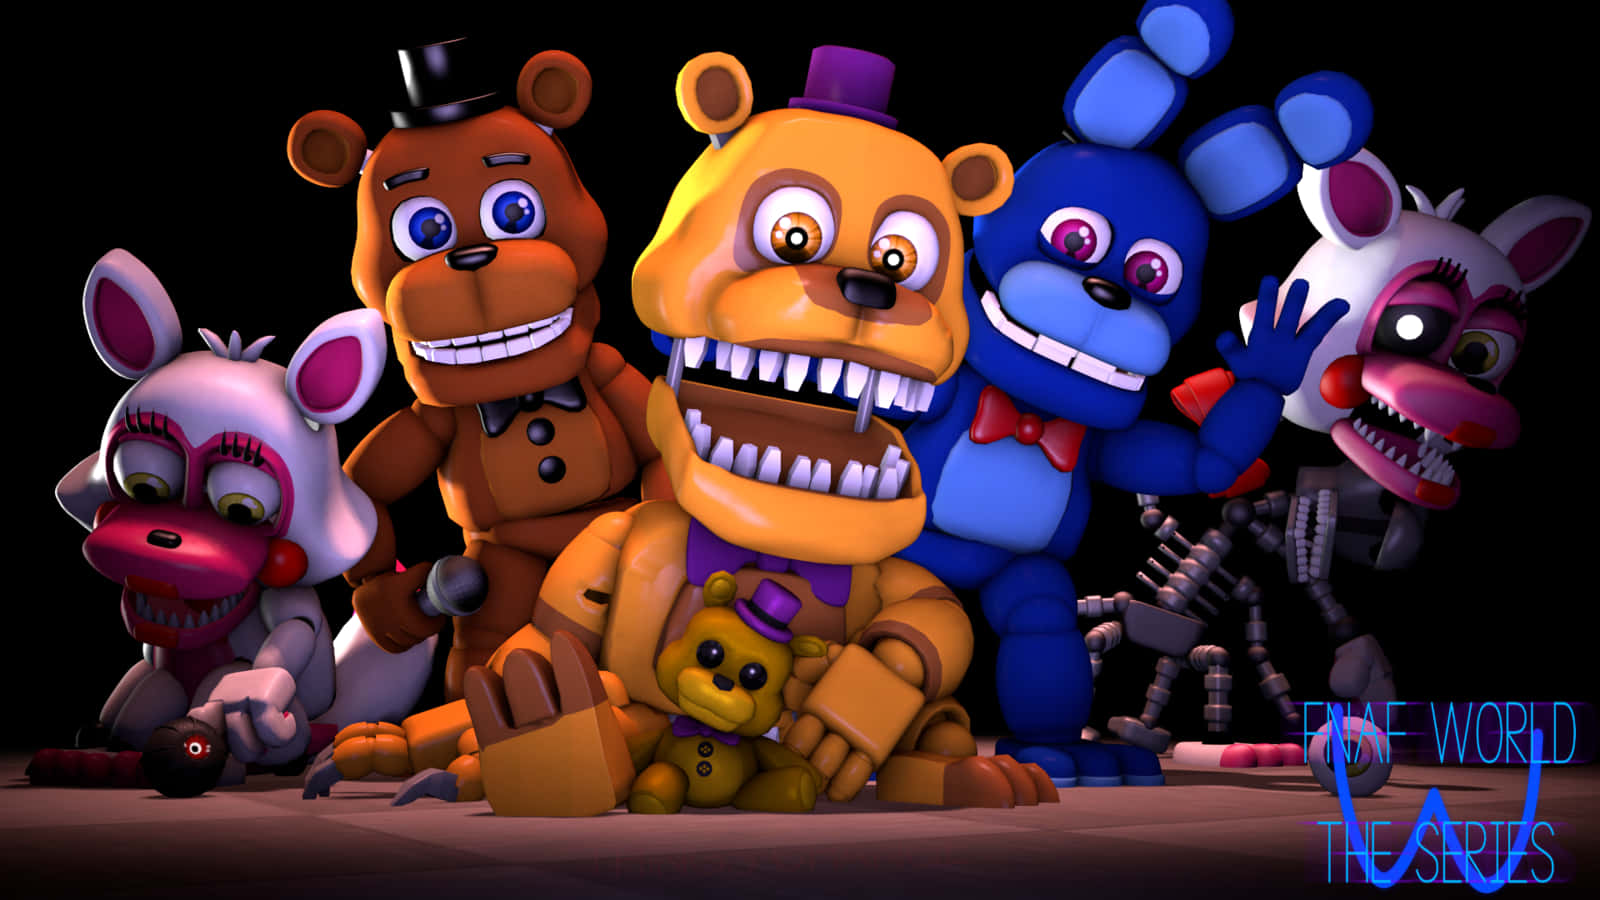 Discover the terror of Five Nights at Freddy’s Desktop and become the hero of the night! Wallpaper